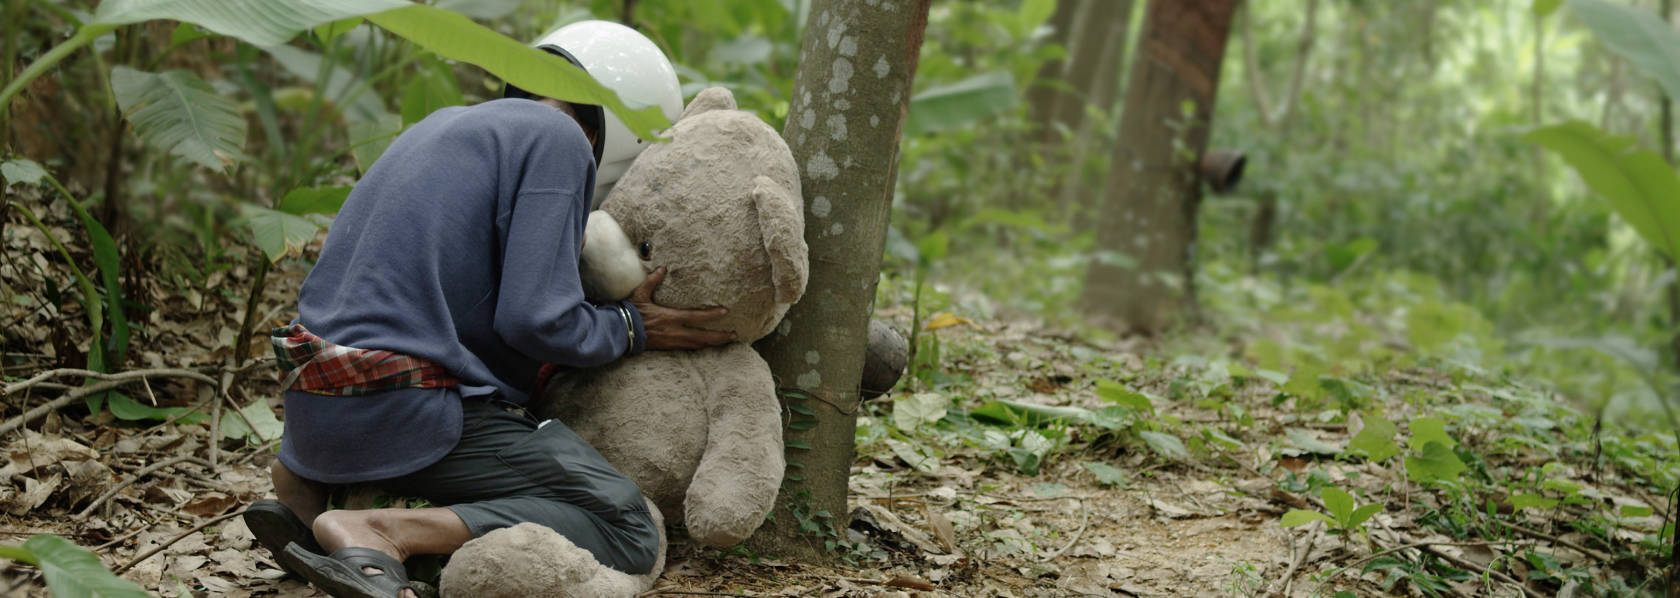 VANISHING POINT - Backview of man with helmet hugging a teddy bear in the forest - THIS Buddhist Film Festival